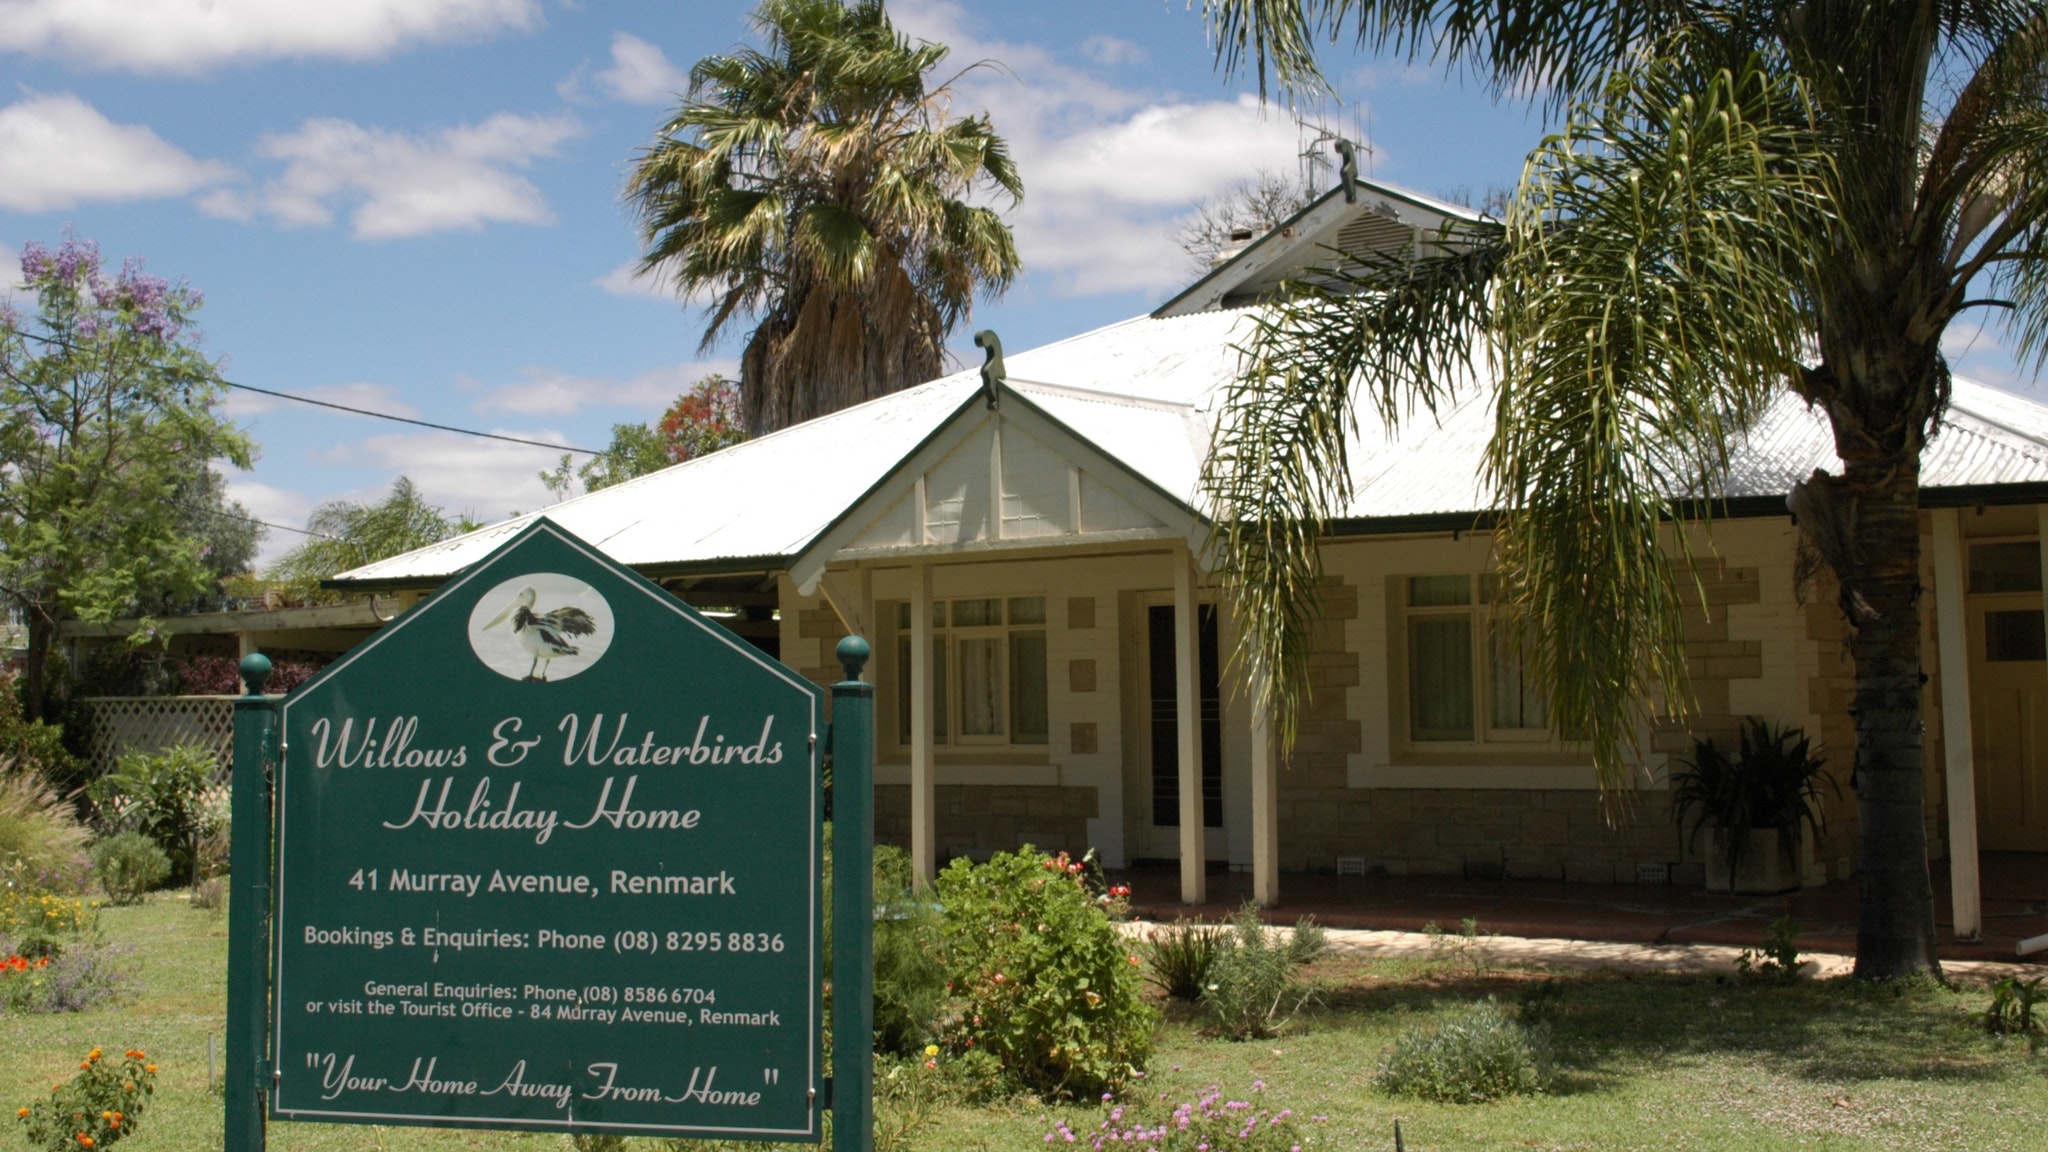 Renmark Holiday Home Willows  Waterbirds - Hotel Accommodation